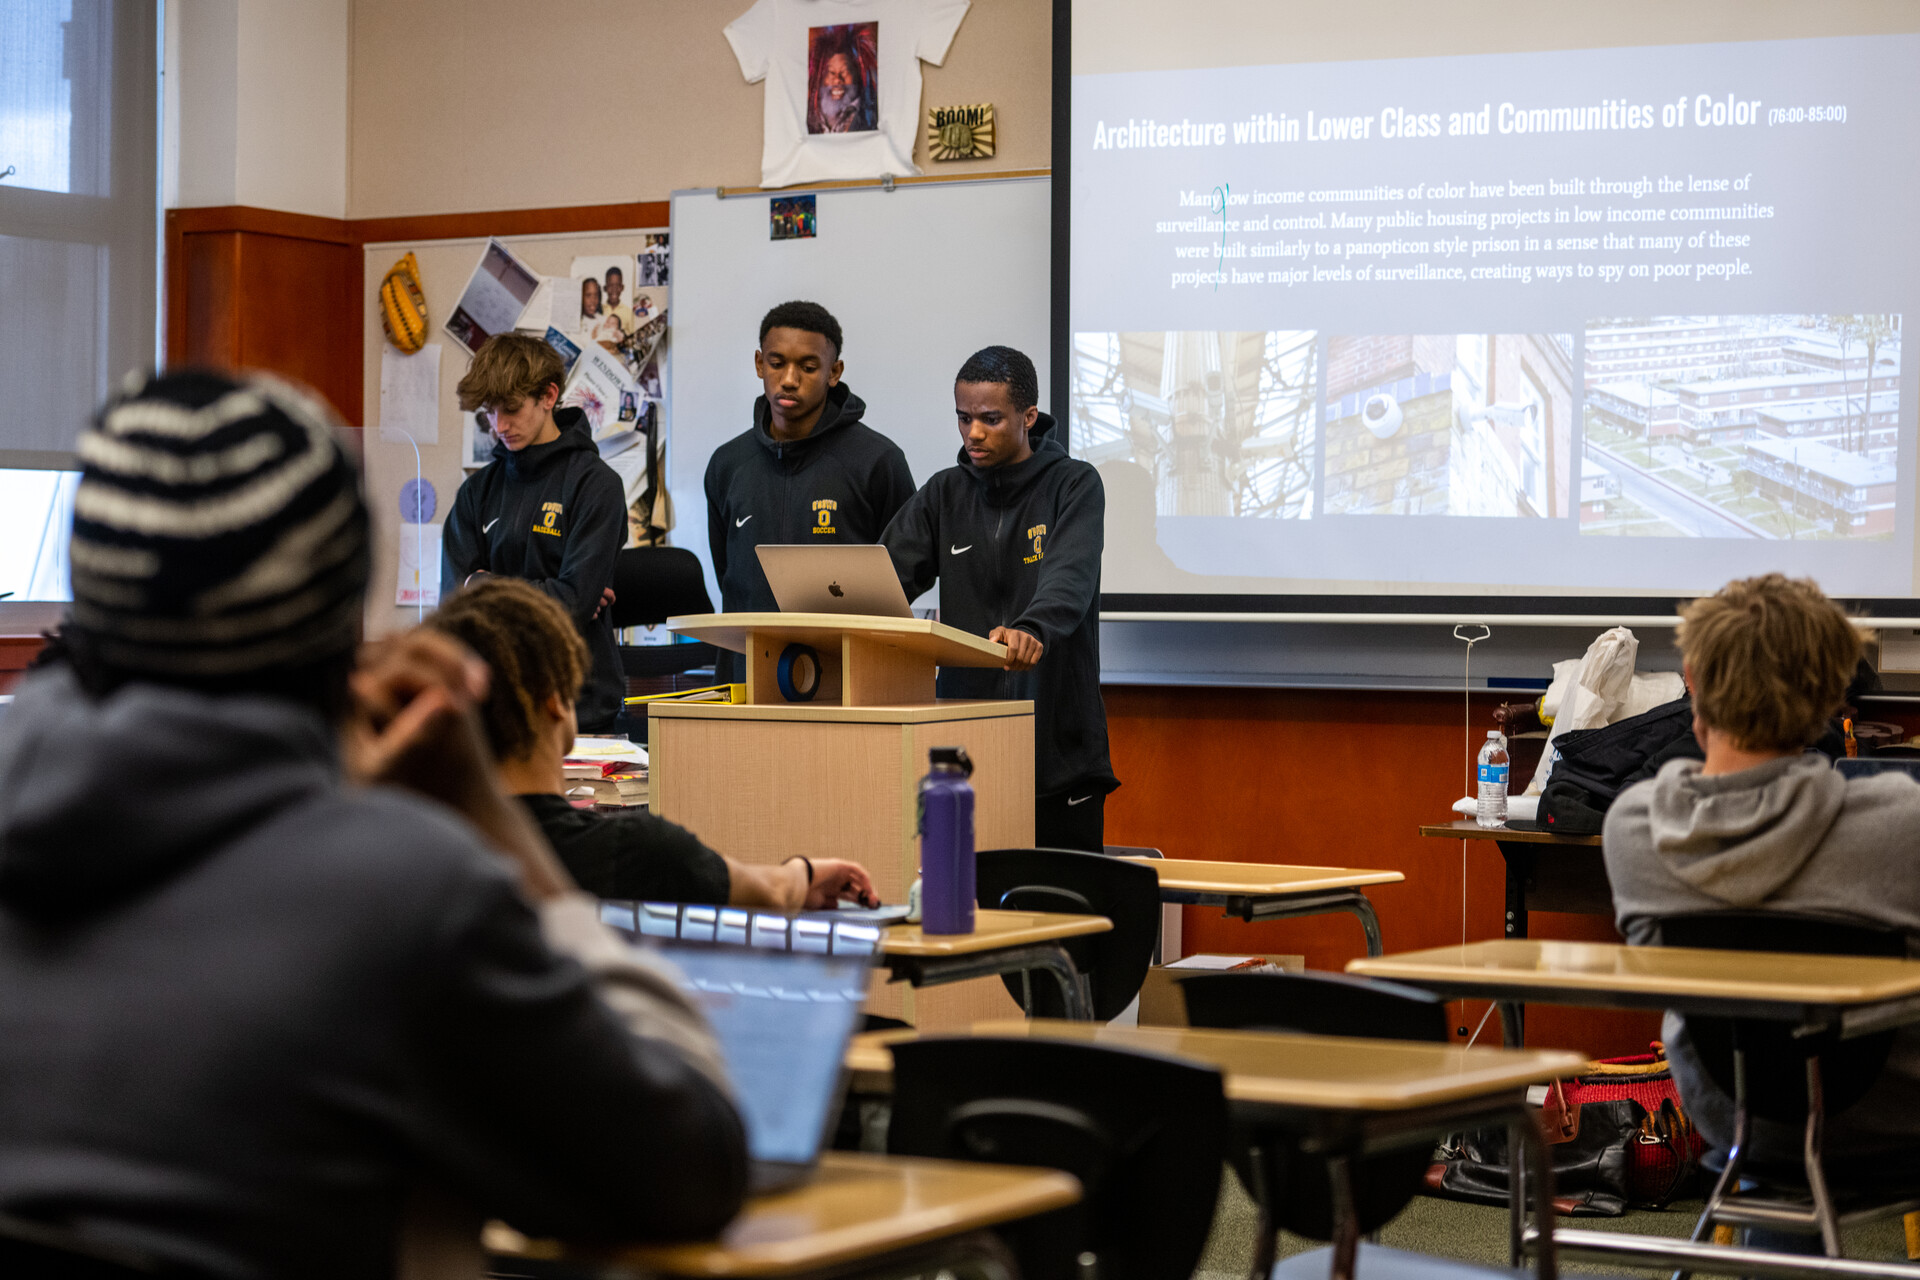 Students sit at desks inside a classroom. A projector displays a presentation. Three high school boys stand at the podium in front of the classroom ready to speak.